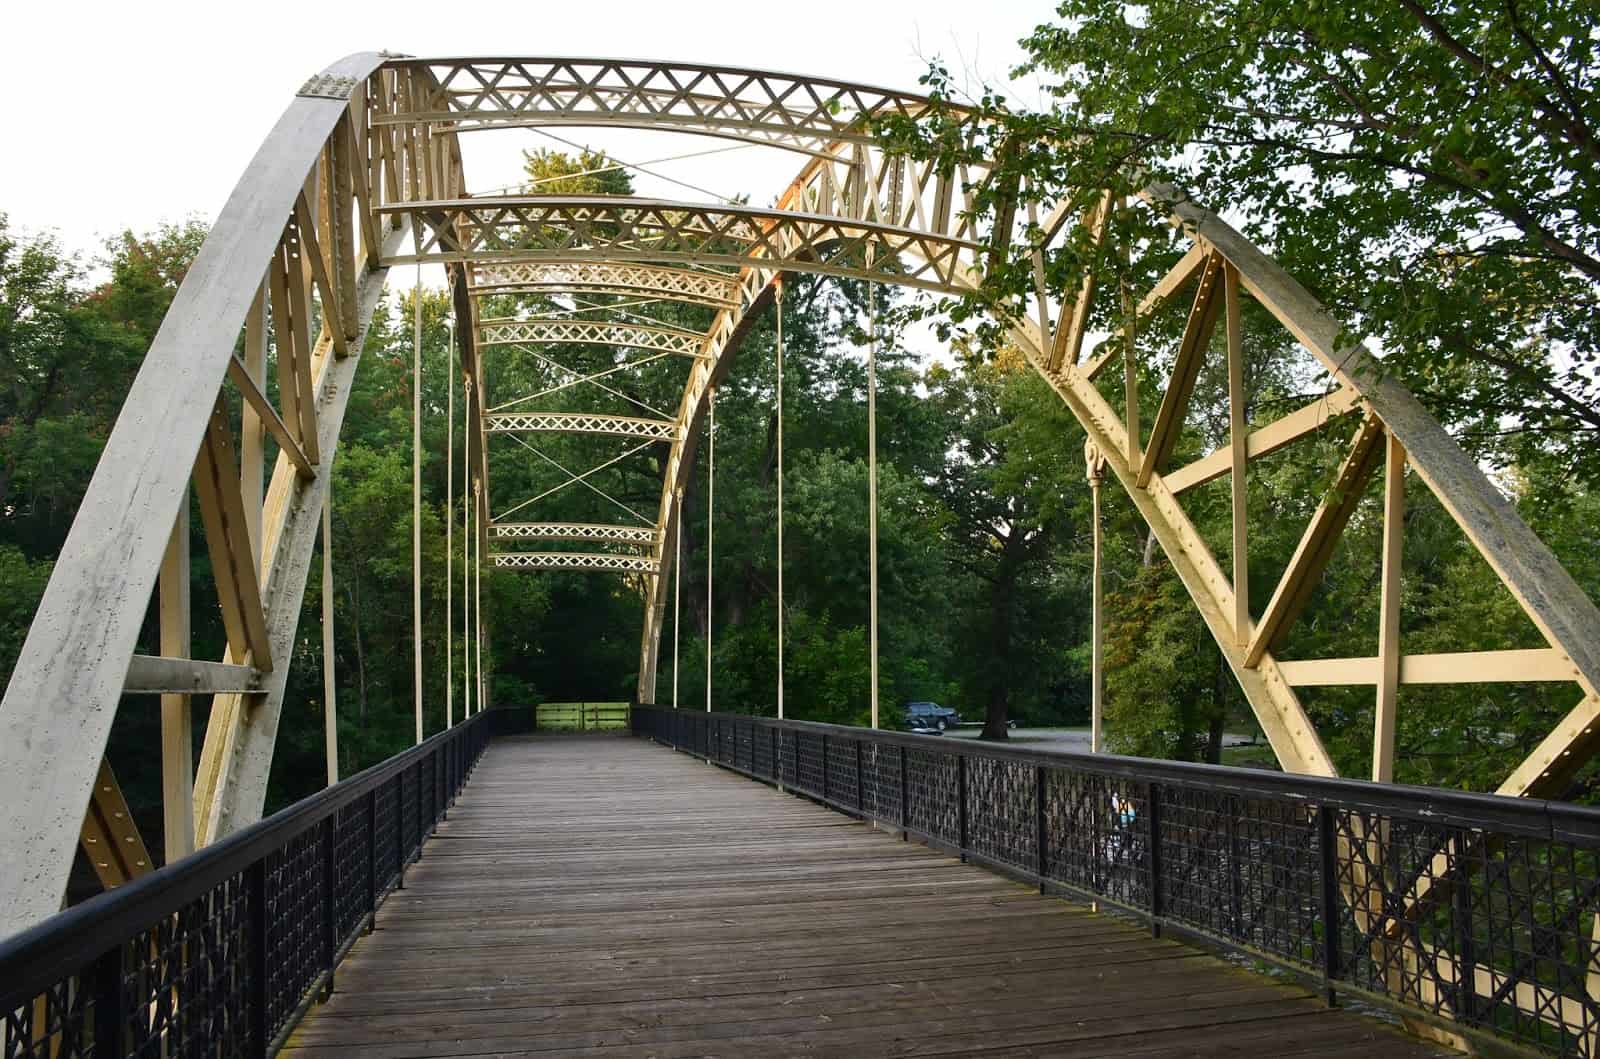 Dunn's Bridge over the Kankakee River in Porter County Indiana